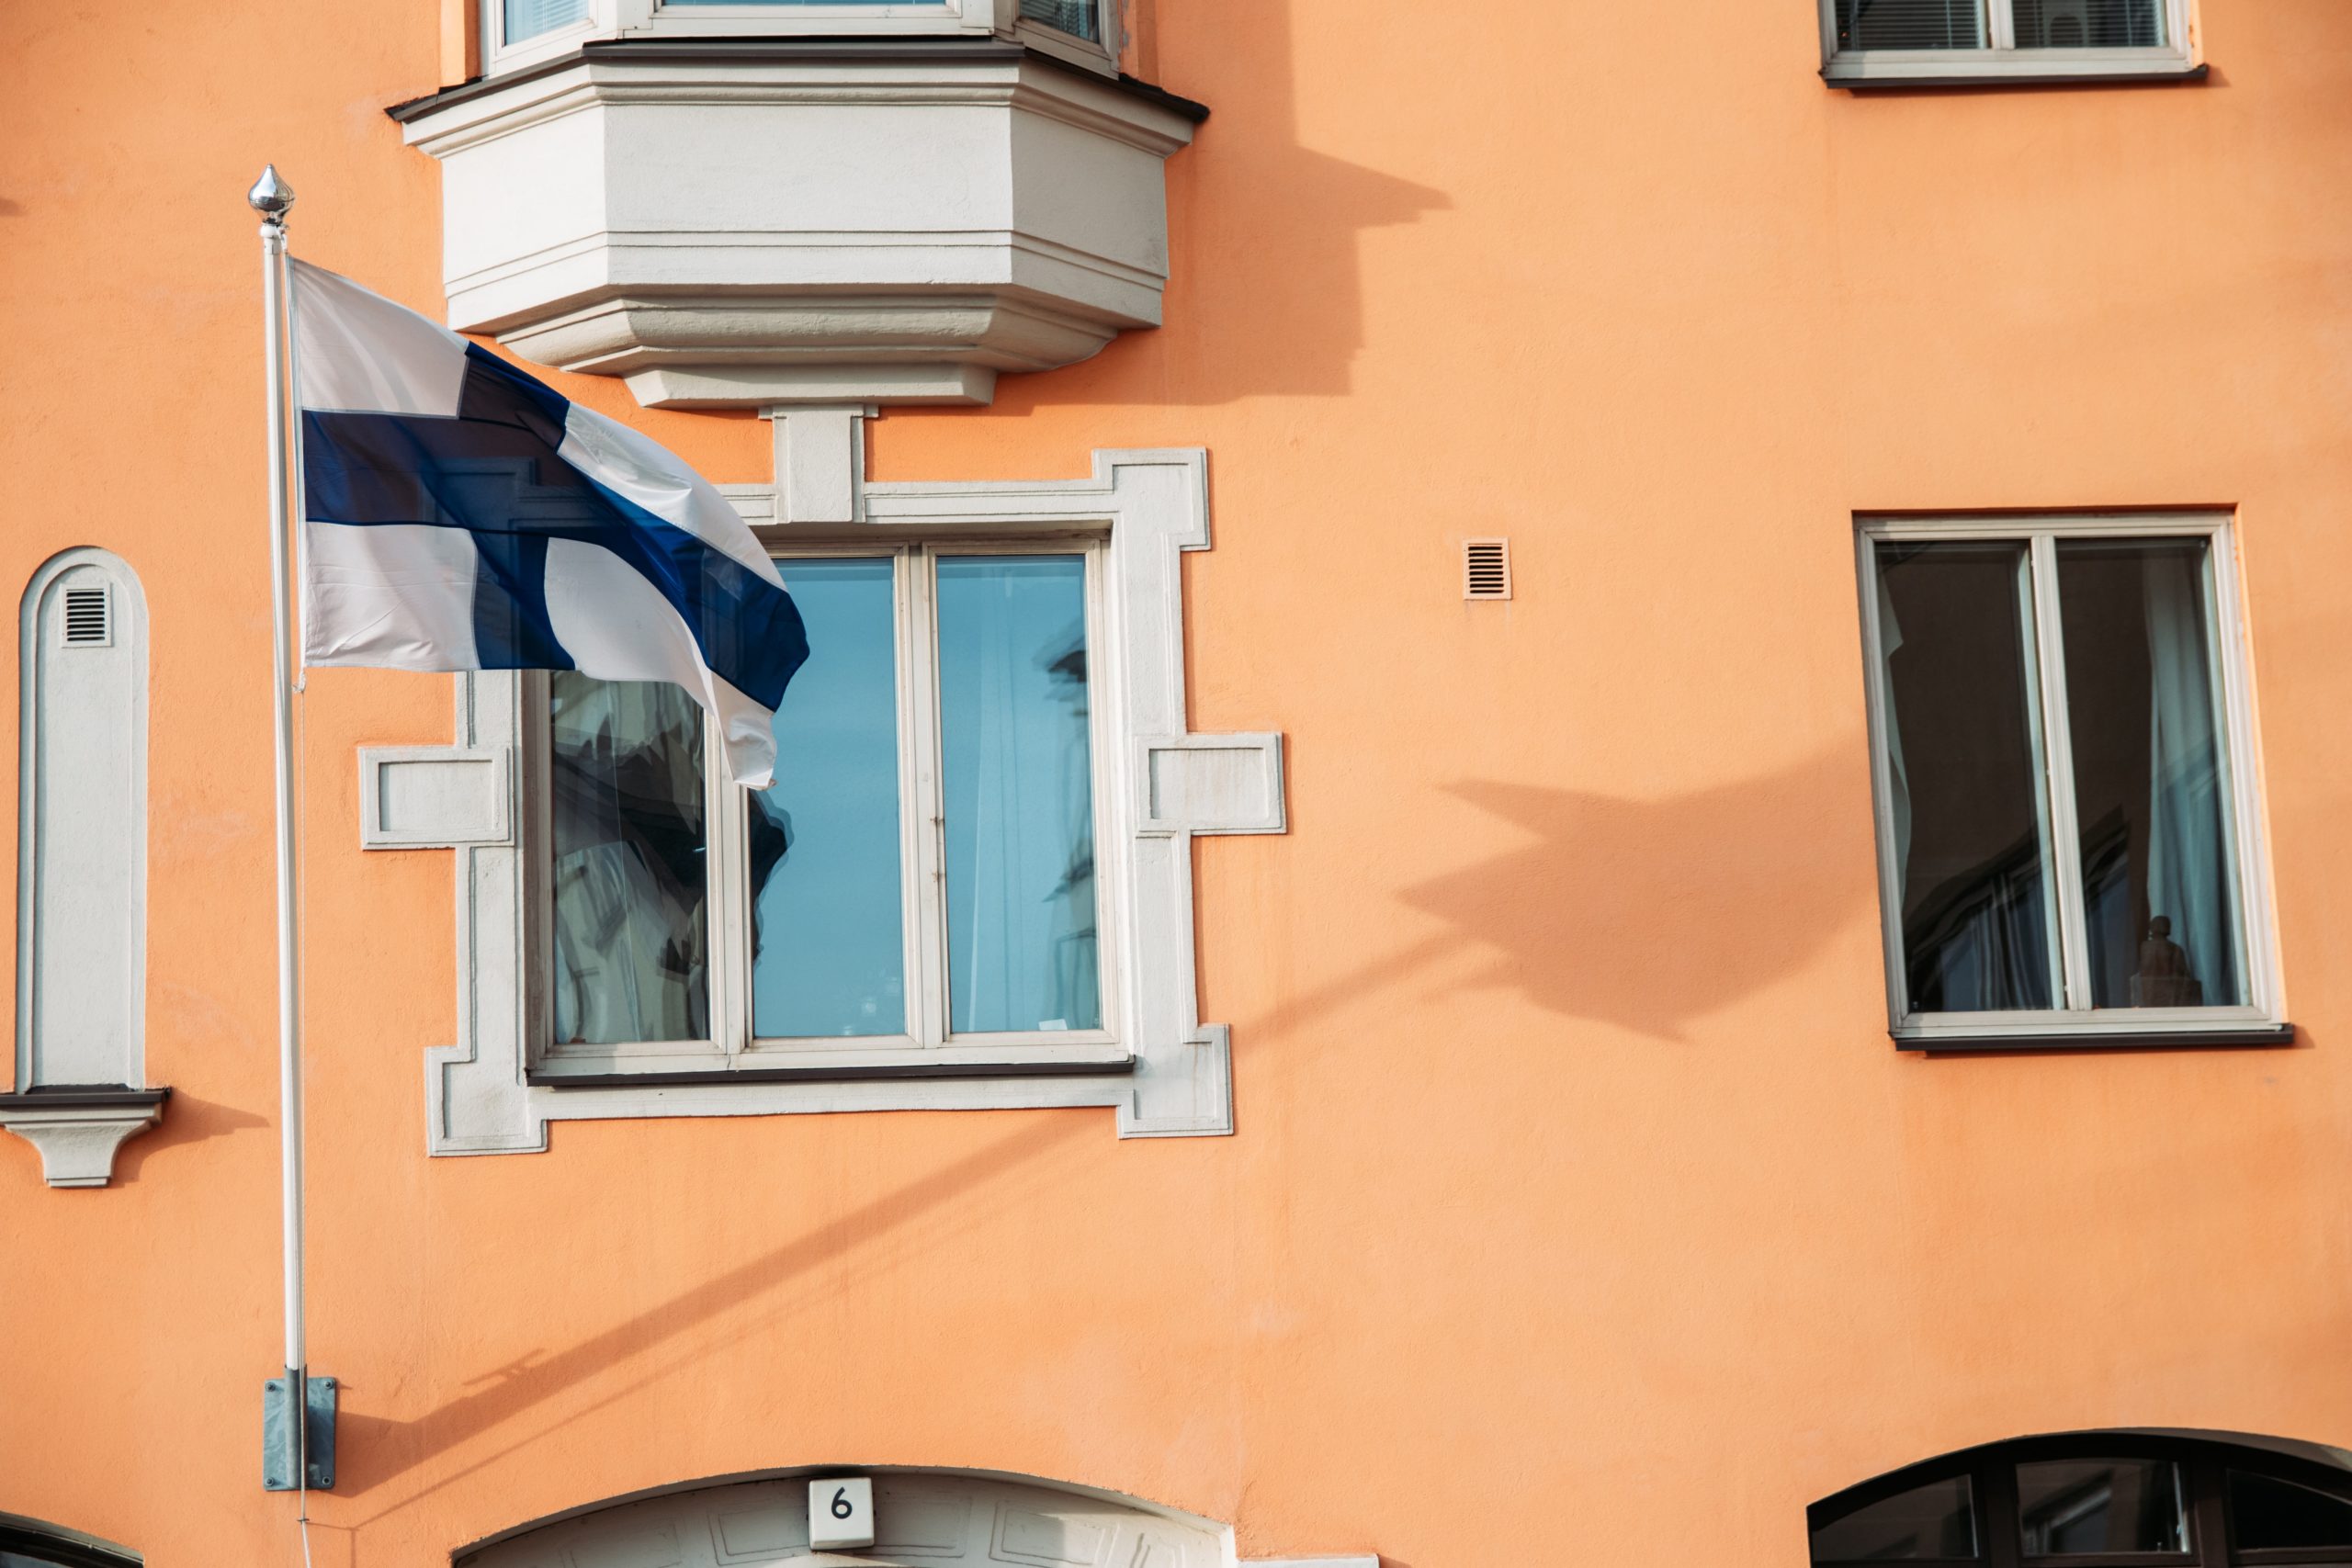 Finnish flag in front of an orange building